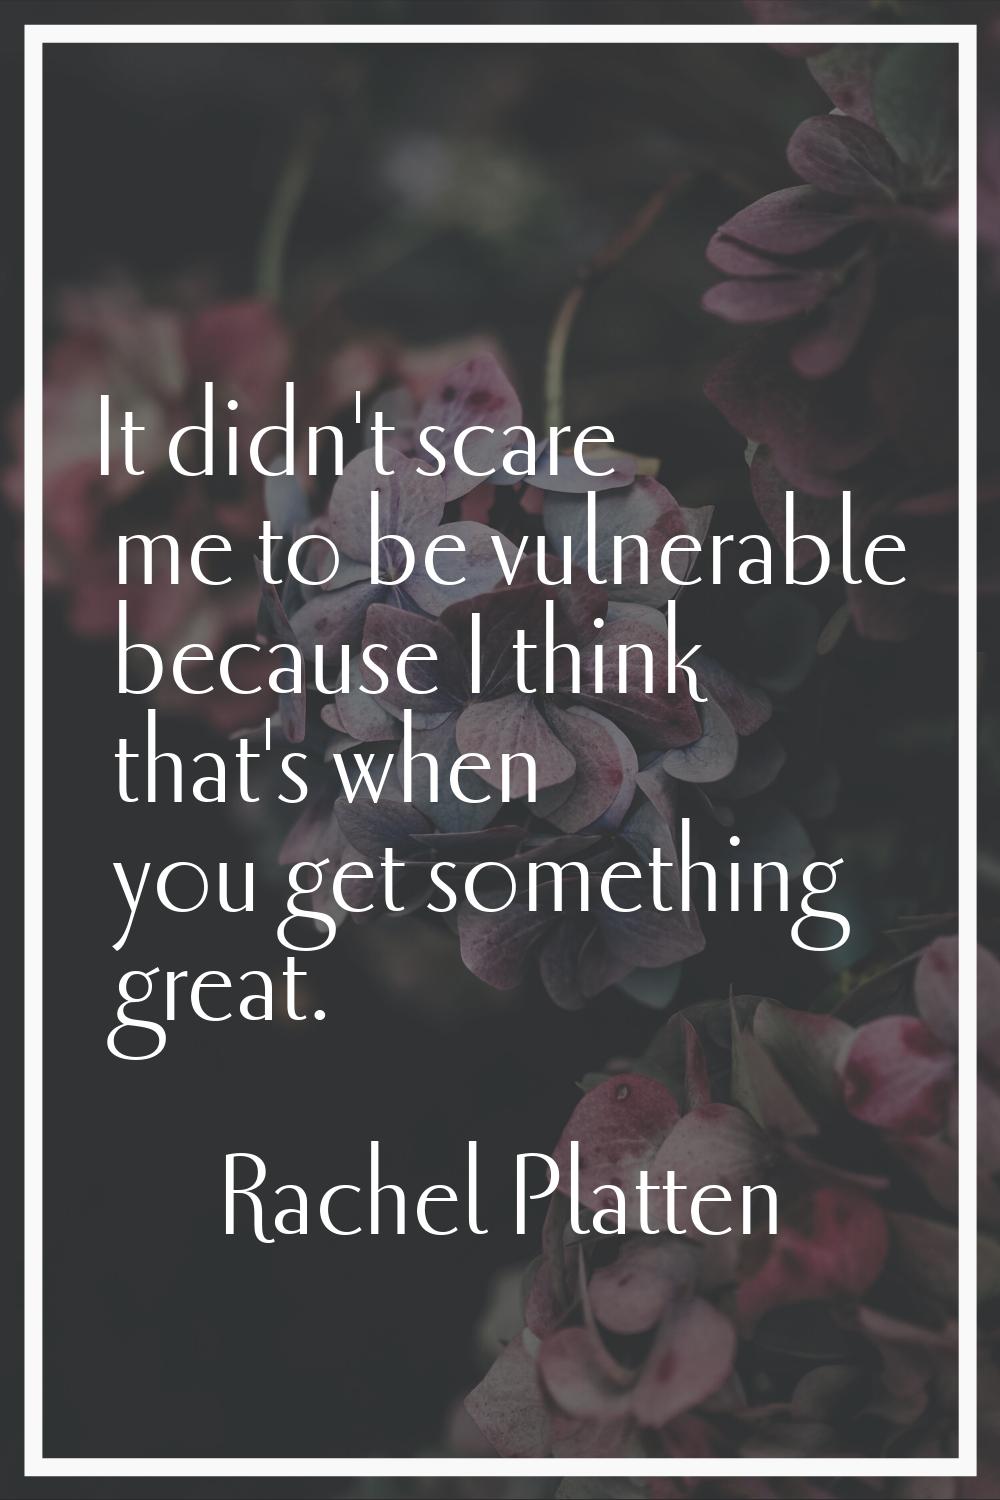 It didn't scare me to be vulnerable because I think that's when you get something great.